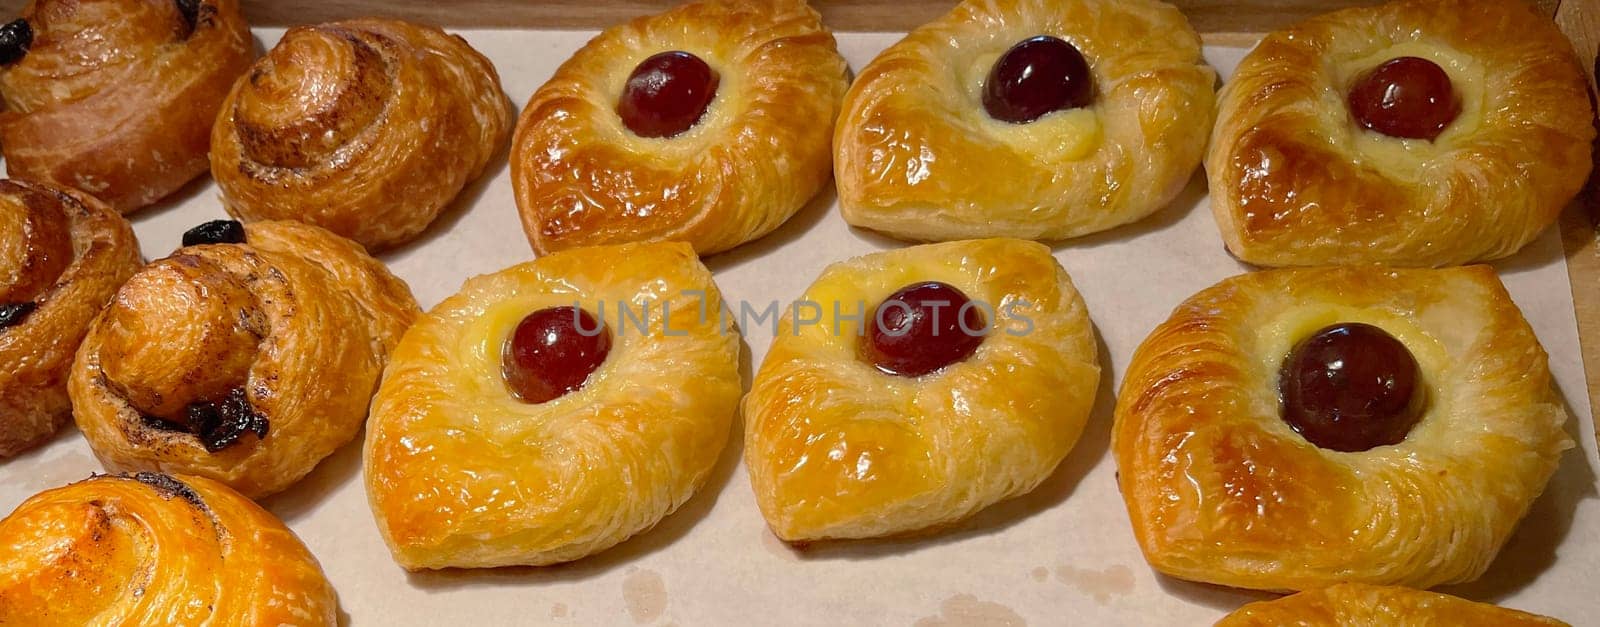 freshly baked danish pastry with apricot jam fruity jelly super delicious warm fresh buttery baked pastries with apricot and peach from baker's kitchen